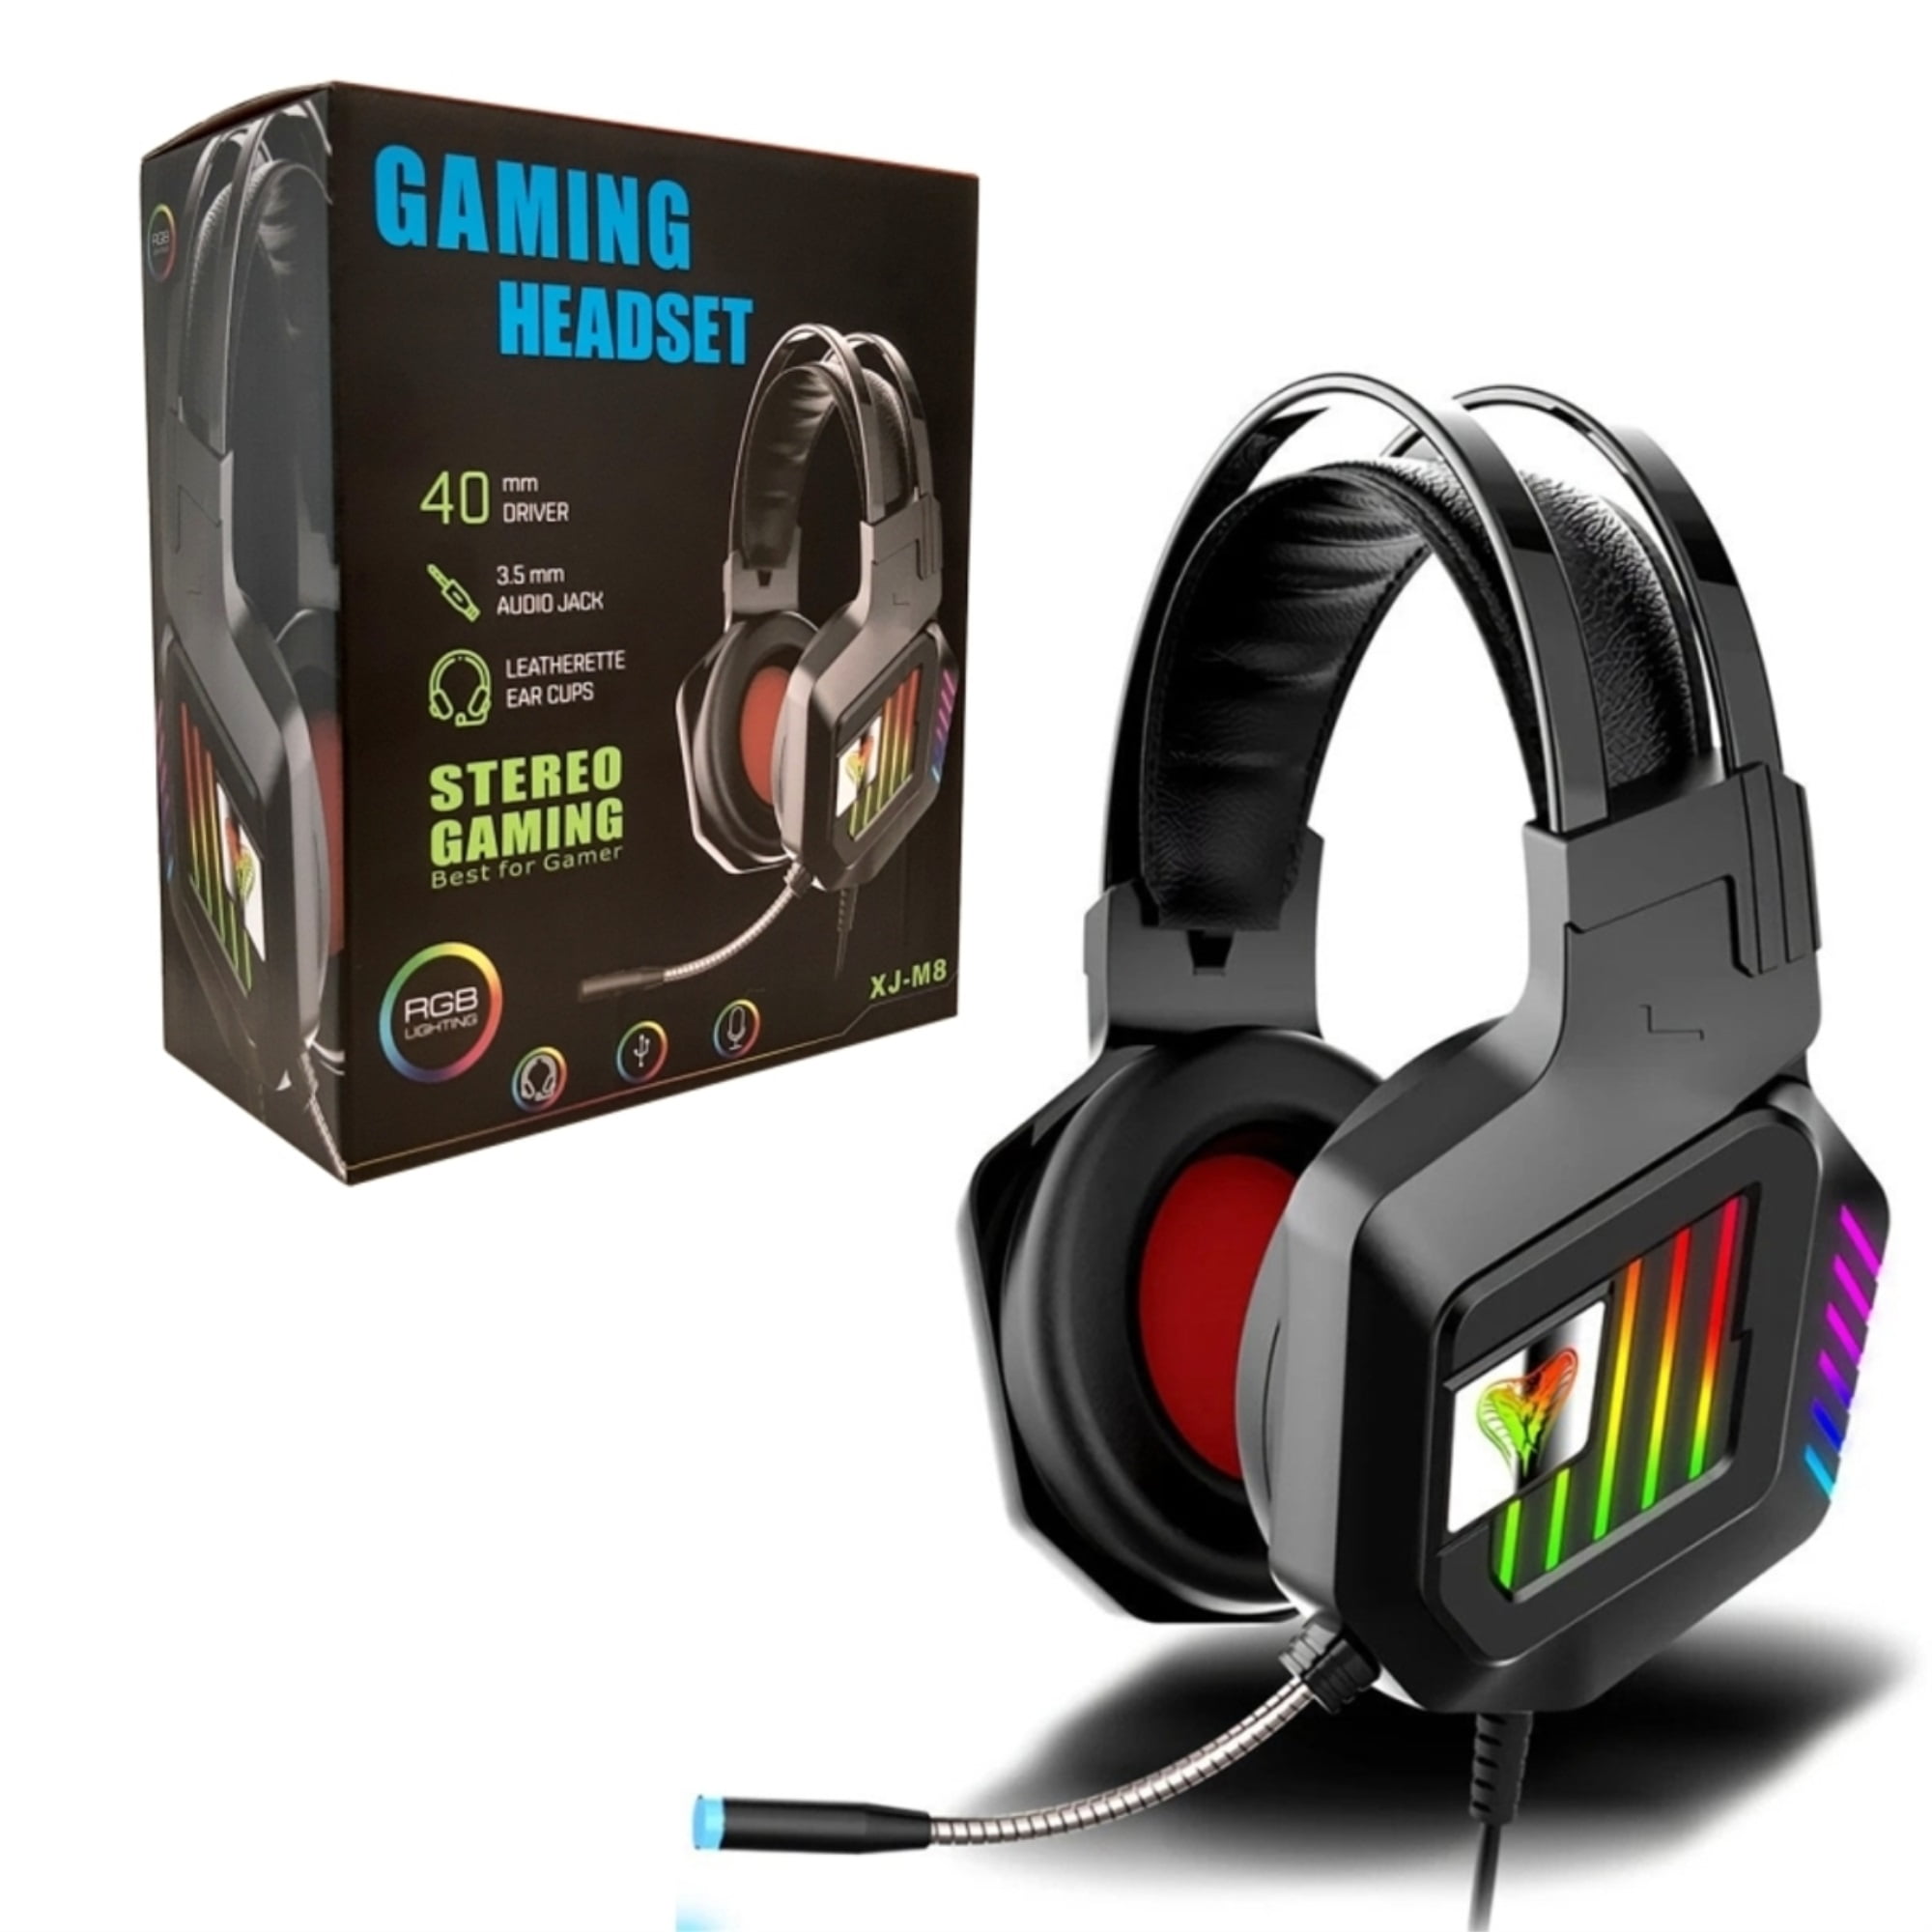 Crack pot Voetganger saai Universal Rgb Light Gaming Headset Ps4 Headset, Xbox One Headset With Noise  Canceling Mic Pc Headset With Stereo Surround Sound - Walmart.com